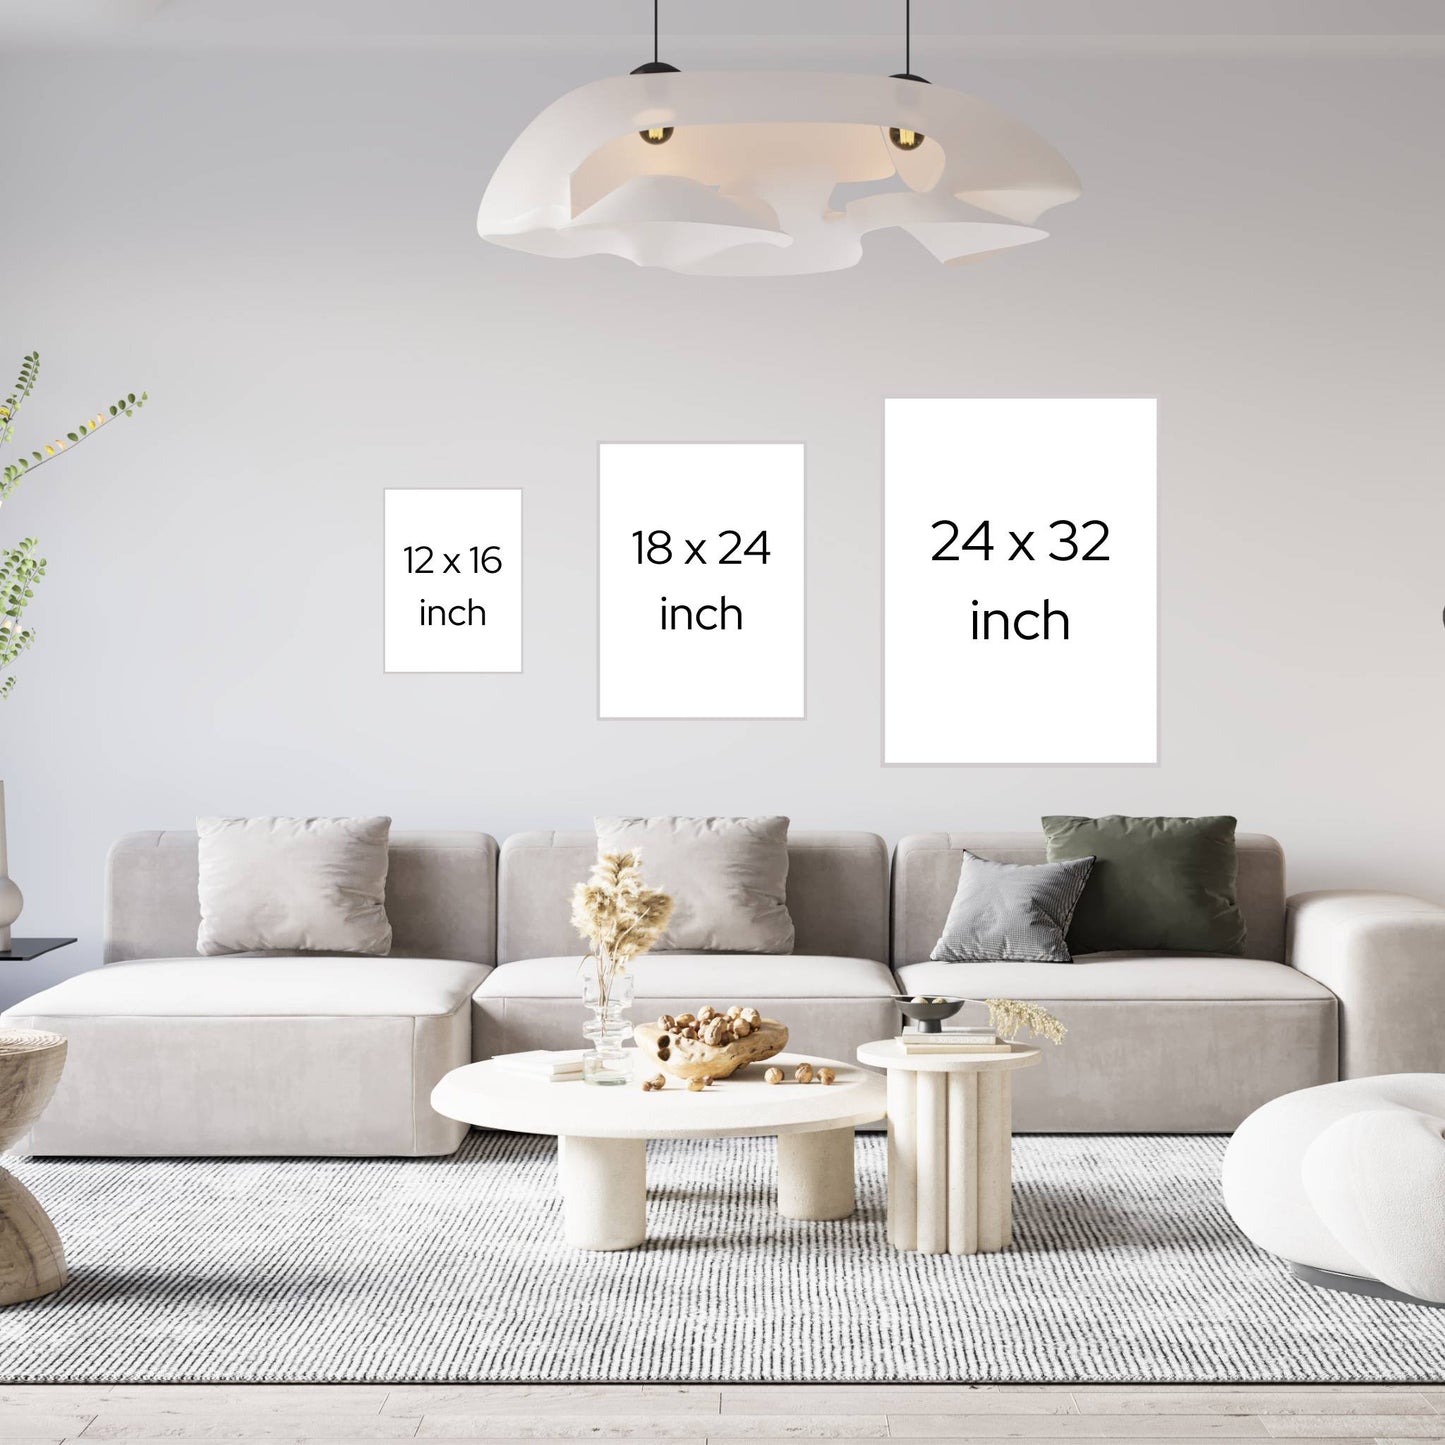 3 poster sizes shown on living room wall